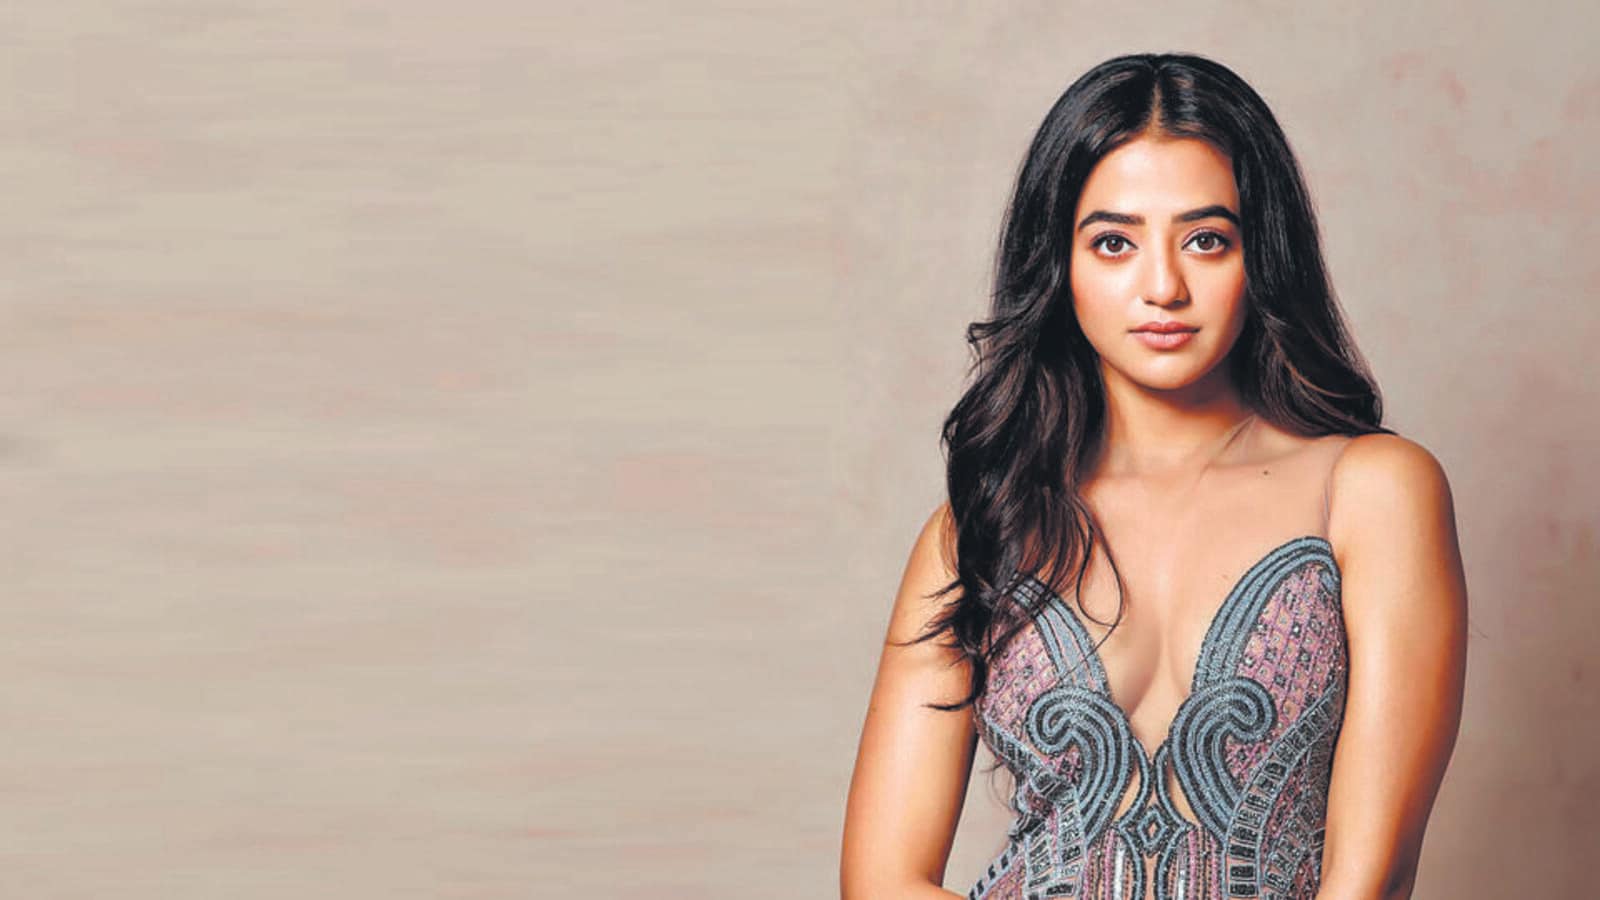 #IndiaAtCannes: Going to Cannes is something I never imagined and I can’t wait to be there: Helly Shah